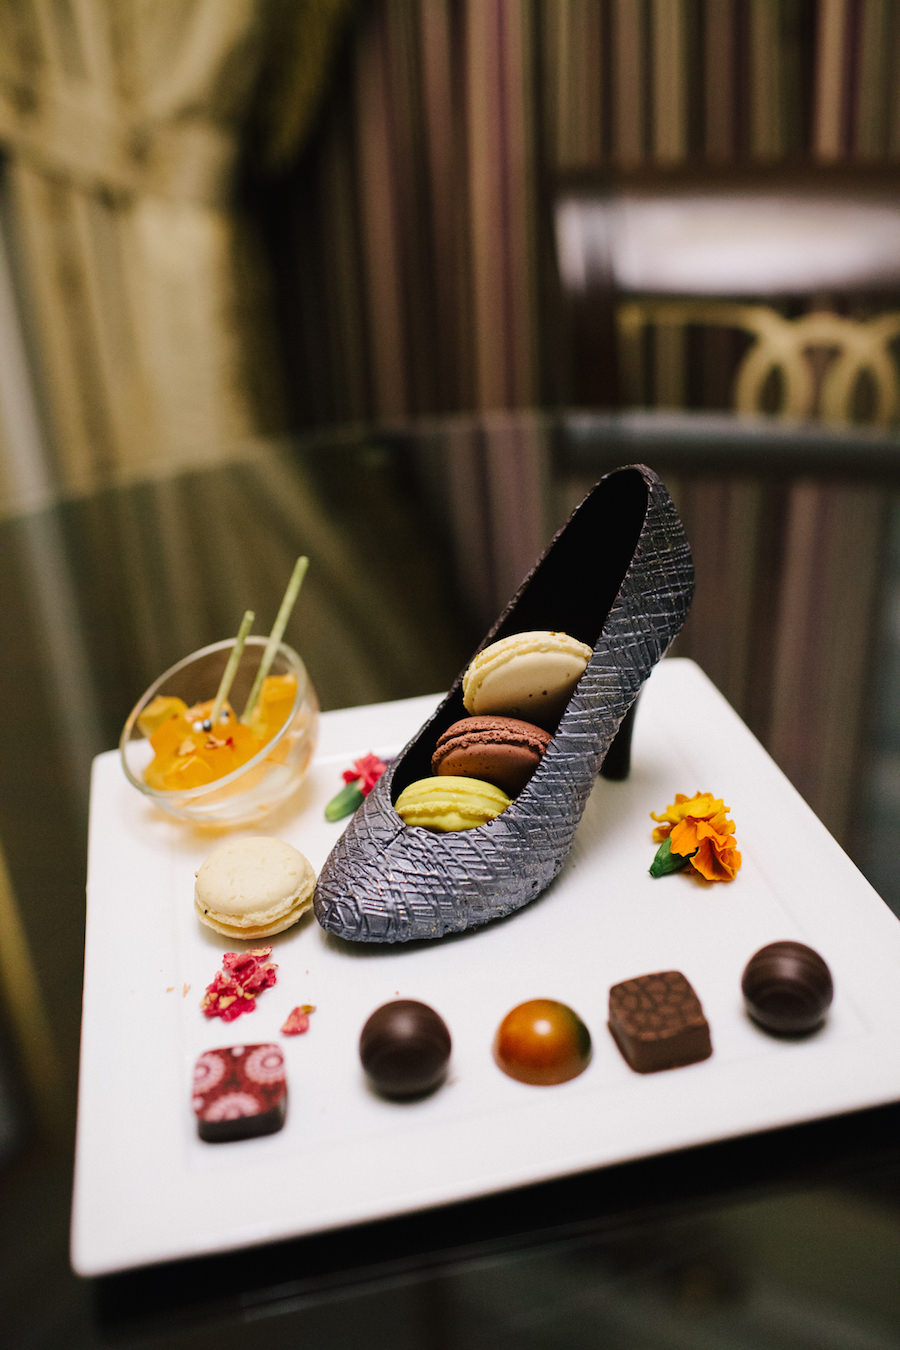 Venetian Las Vegas Hotel Room Review for Girls' Bachelorette Party Wedding Weekend Chocolate Shoe Welcome Gift